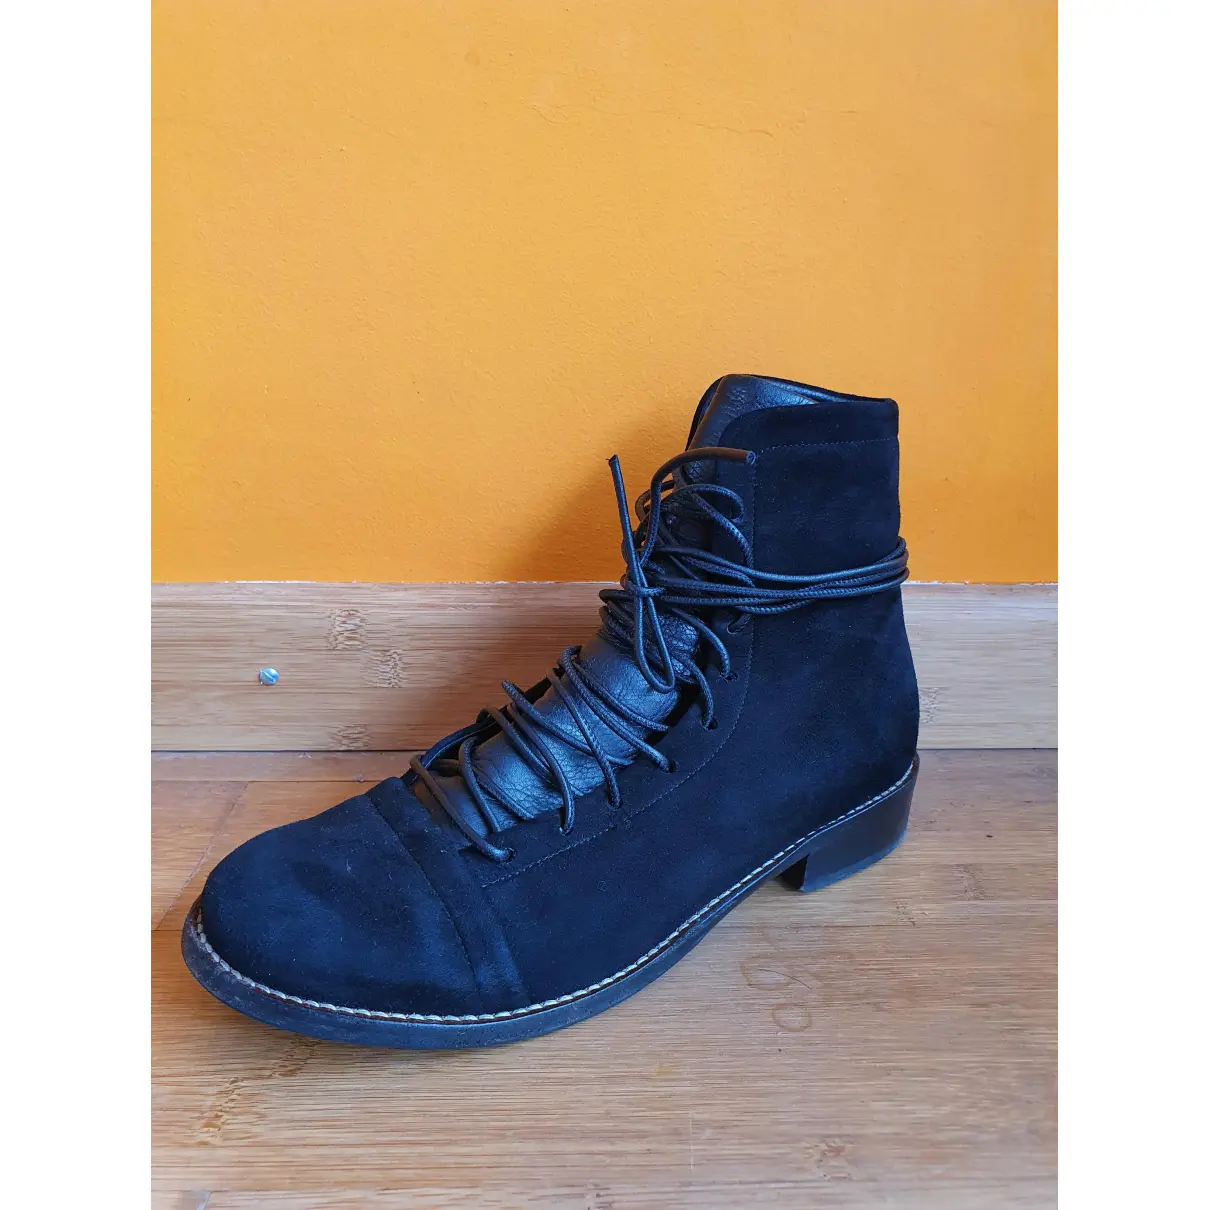 Buy Iro Lace up boots online